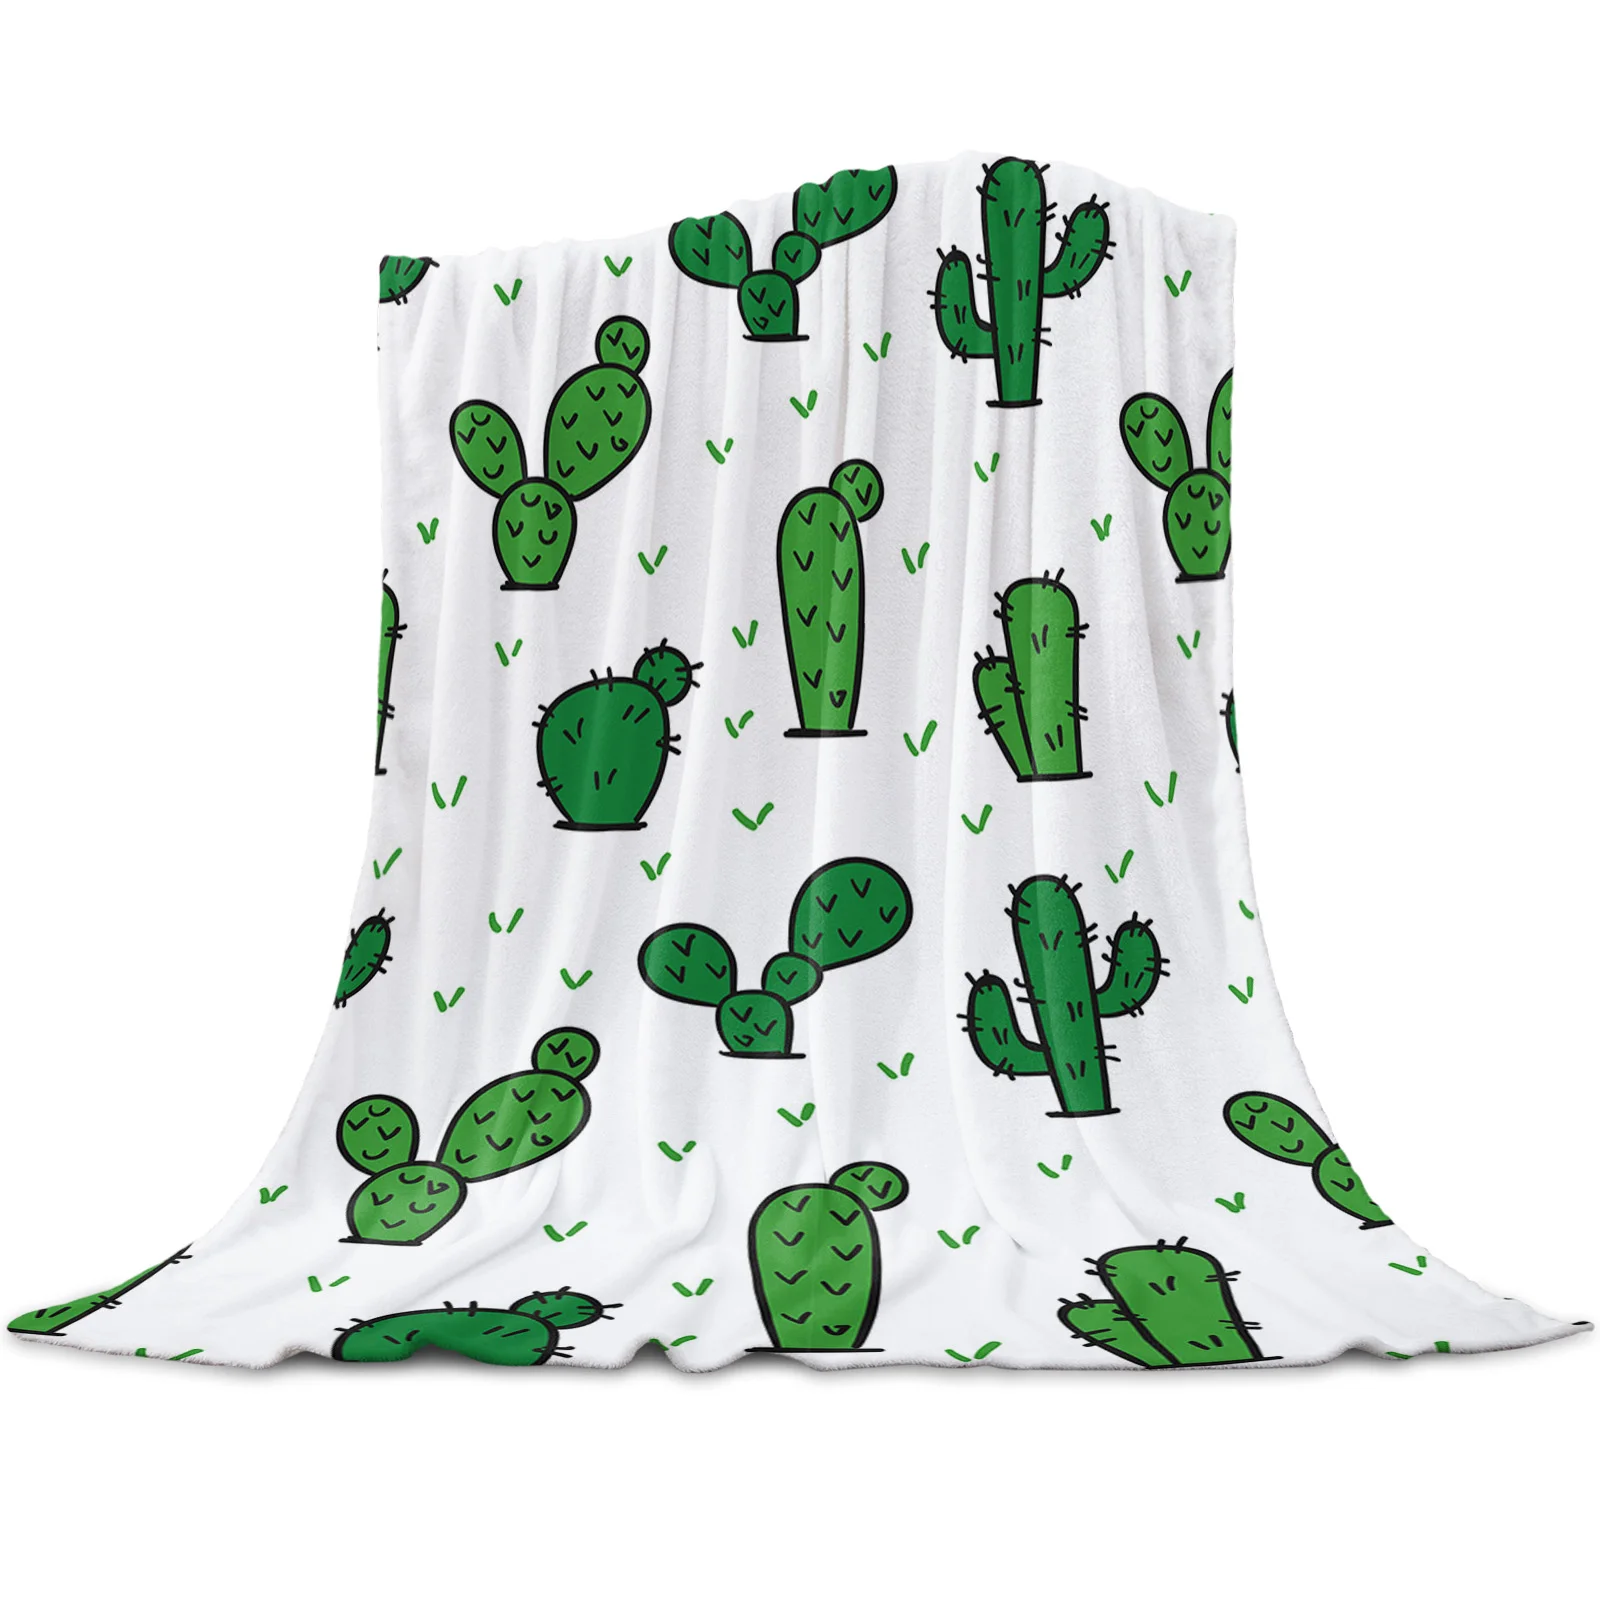 

Plant Potted Cactus Pattern Flannel Throw Blanket Warm Cozy for Home Sofa Bed Decor King Size Kids Camping Gifts Cartoon Soft